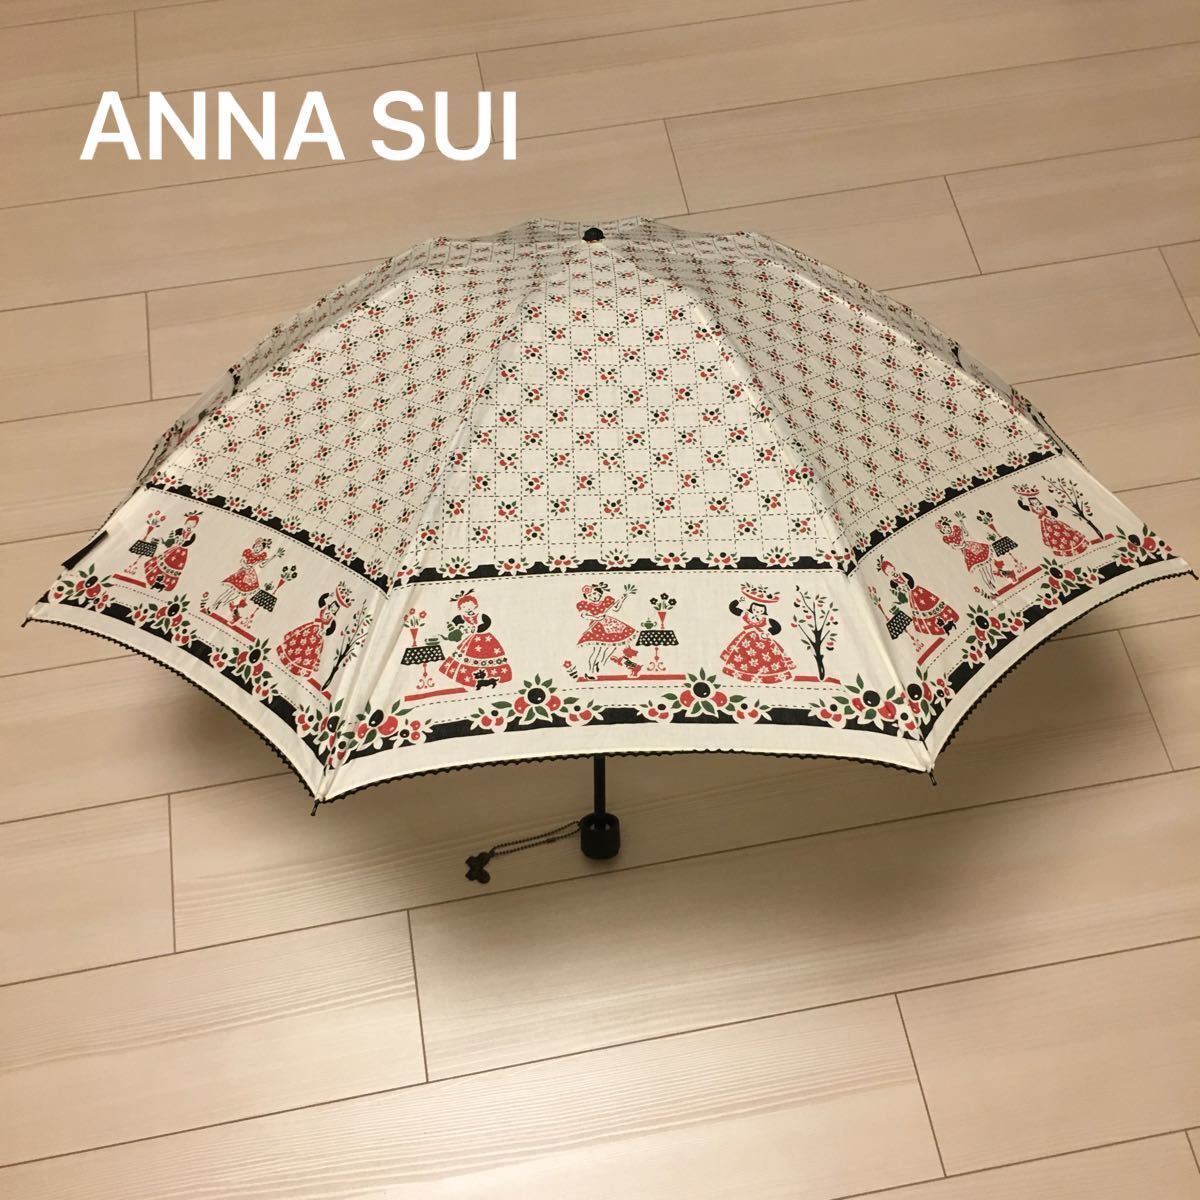 ANNA SUI 日傘 晴雨兼用折りたたみ 生成り/黒/赤/緑